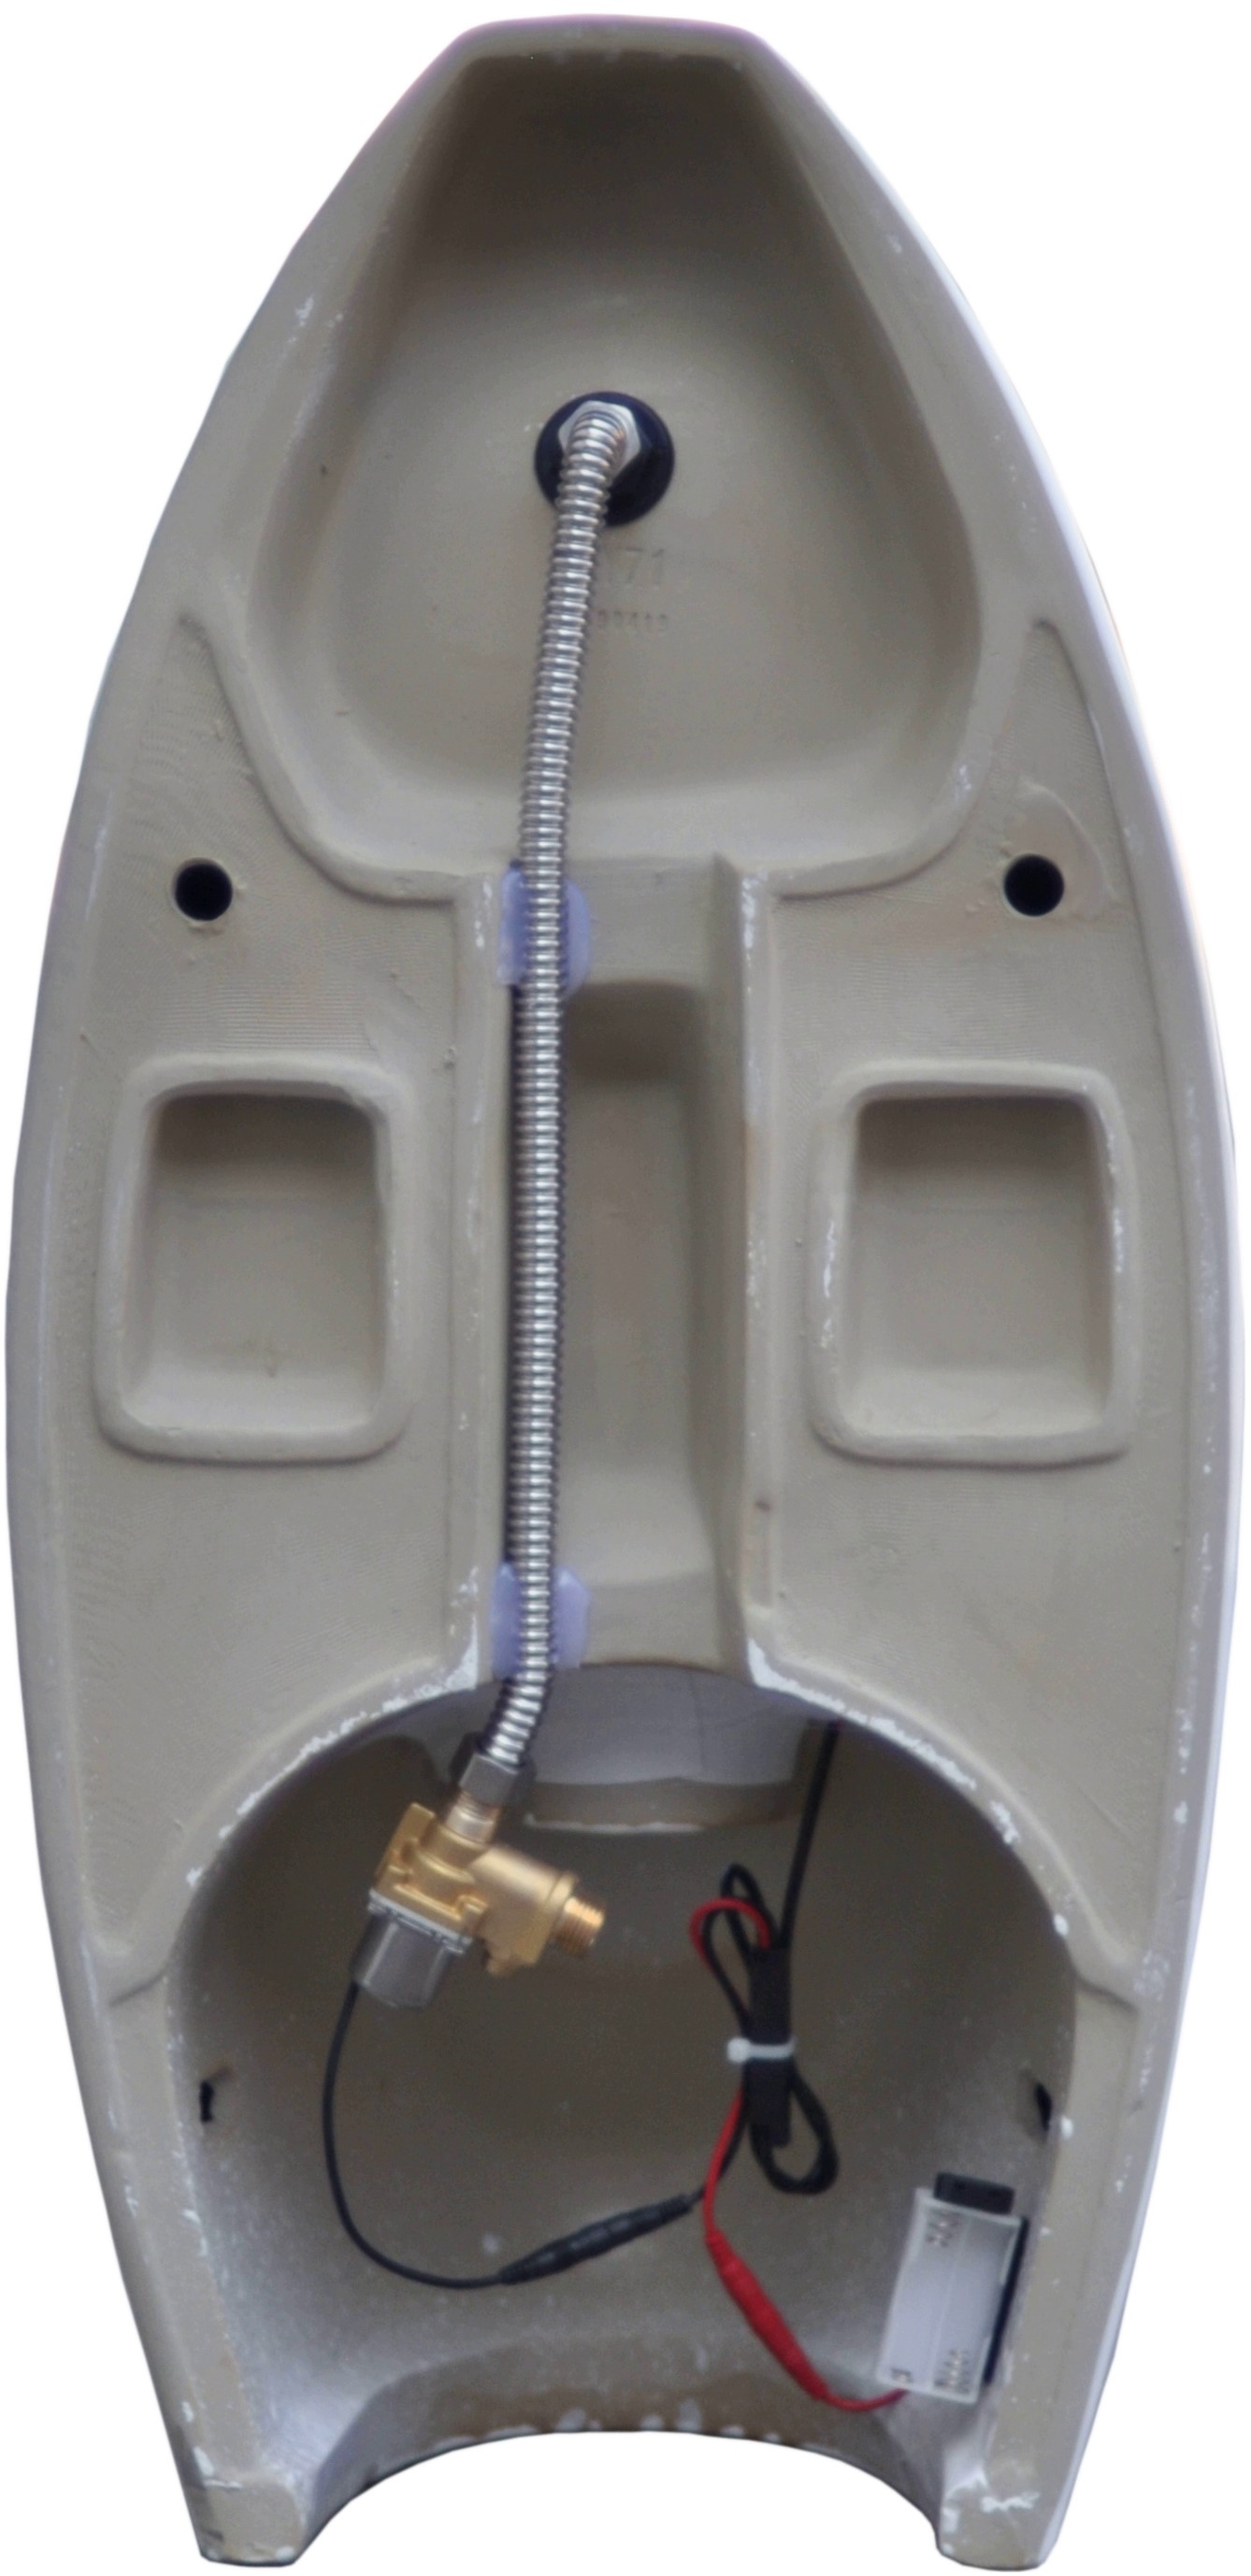 Automatic wall mounted urinal KR6022